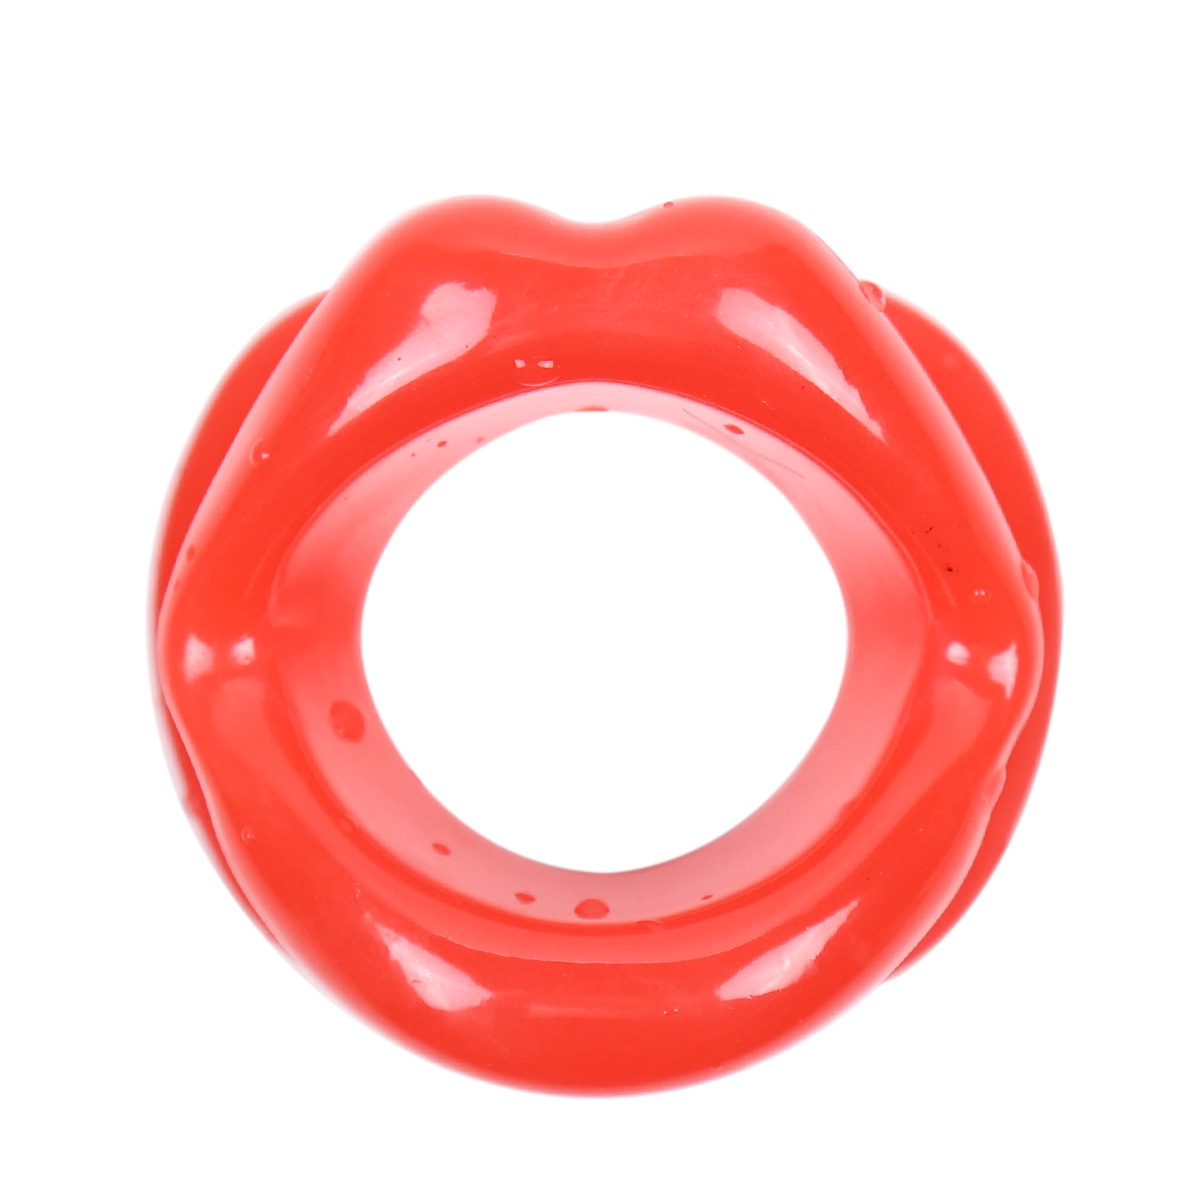 Pu Leather Silicone Mouth Ball, Bdsm Bondage Lips Ring, Open Gag Ball, Adult Erotic Sex Toy For Couples Toys, Mouth Gag Games photo